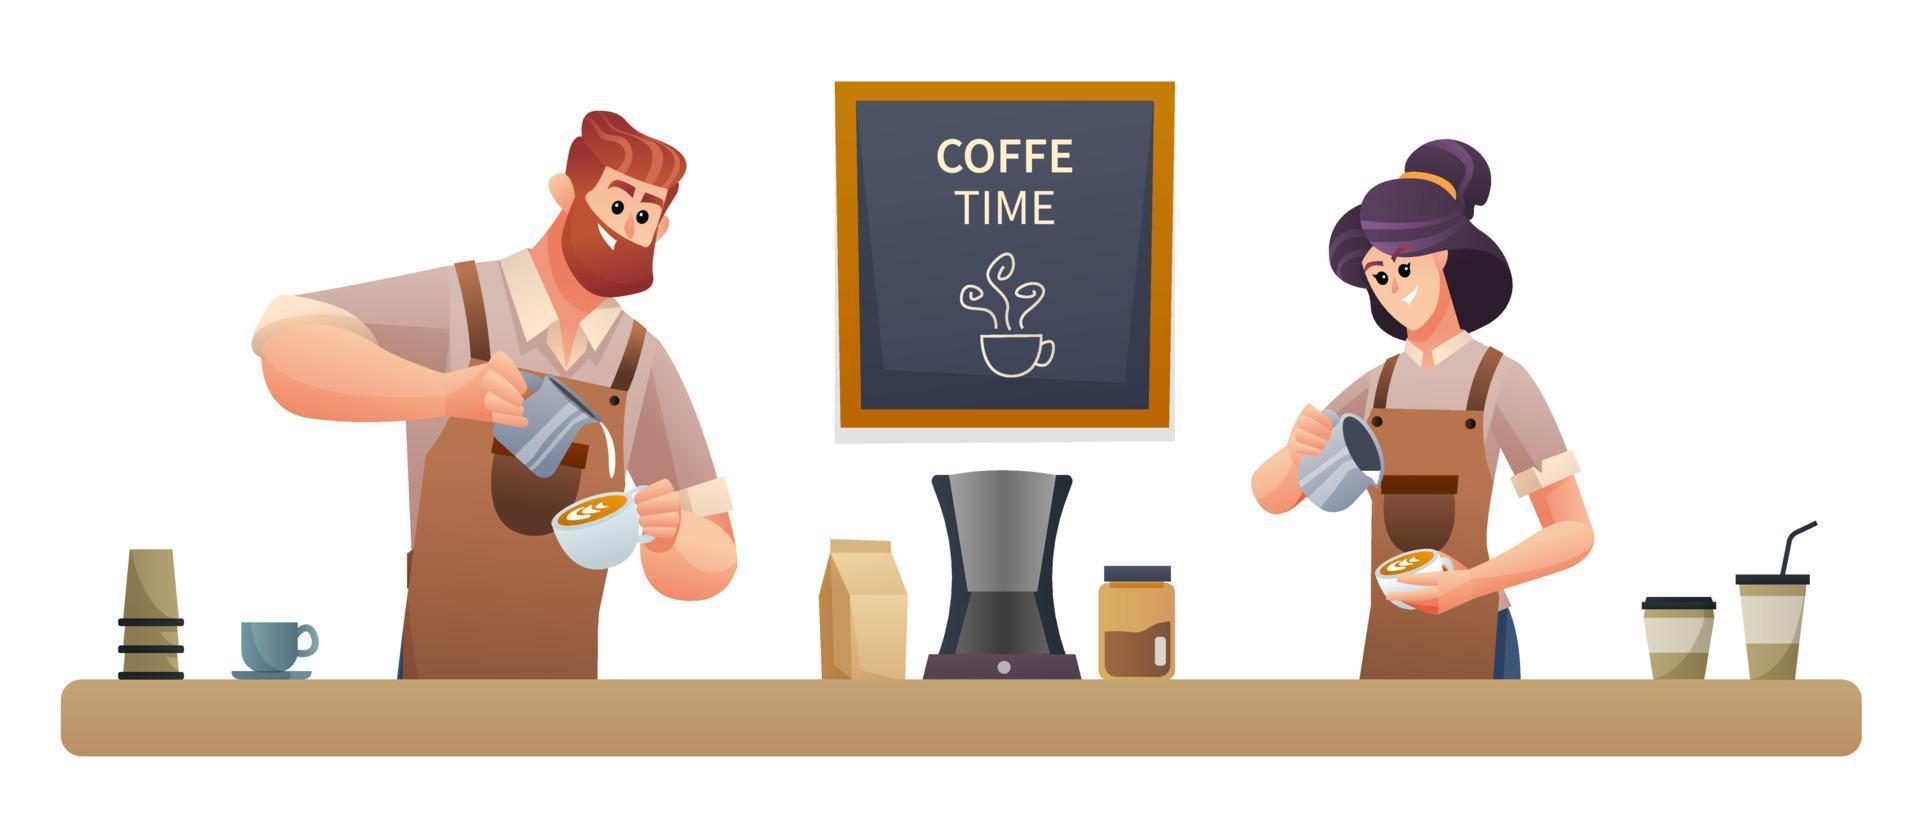 Male and female baristas making coffee at coffee shop illustration vector